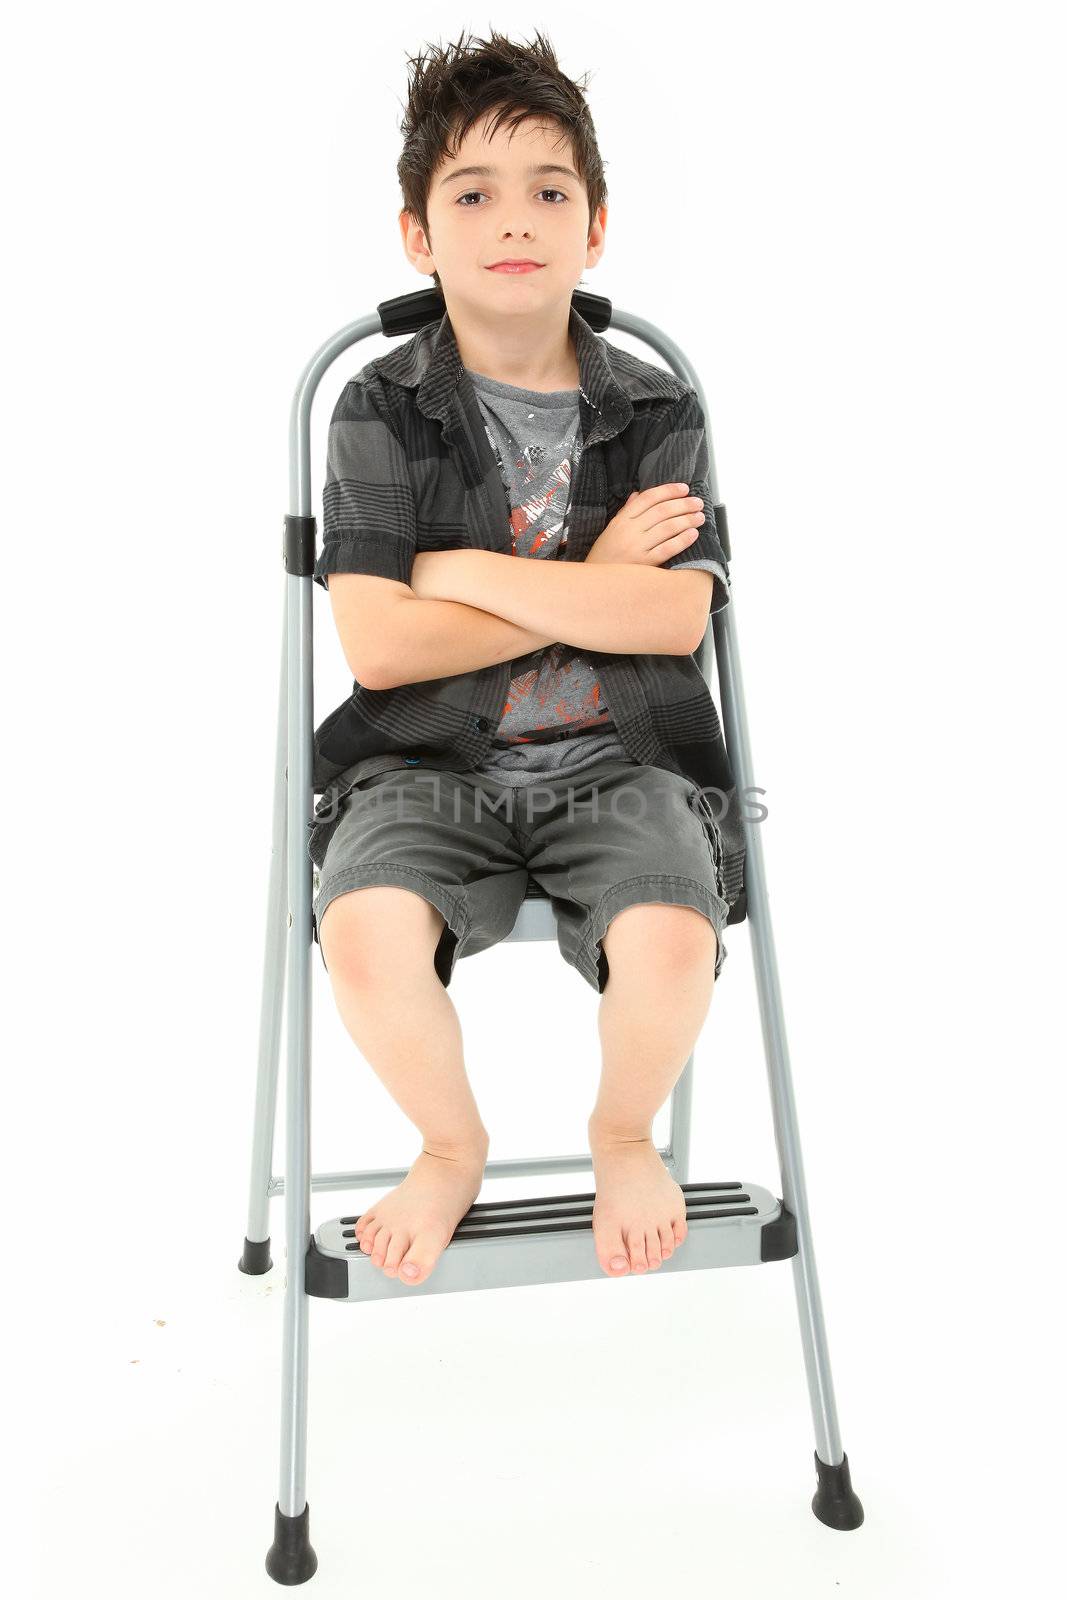 Attractive 8 year old boy child sitting with arms crossed on step ladder over white background.